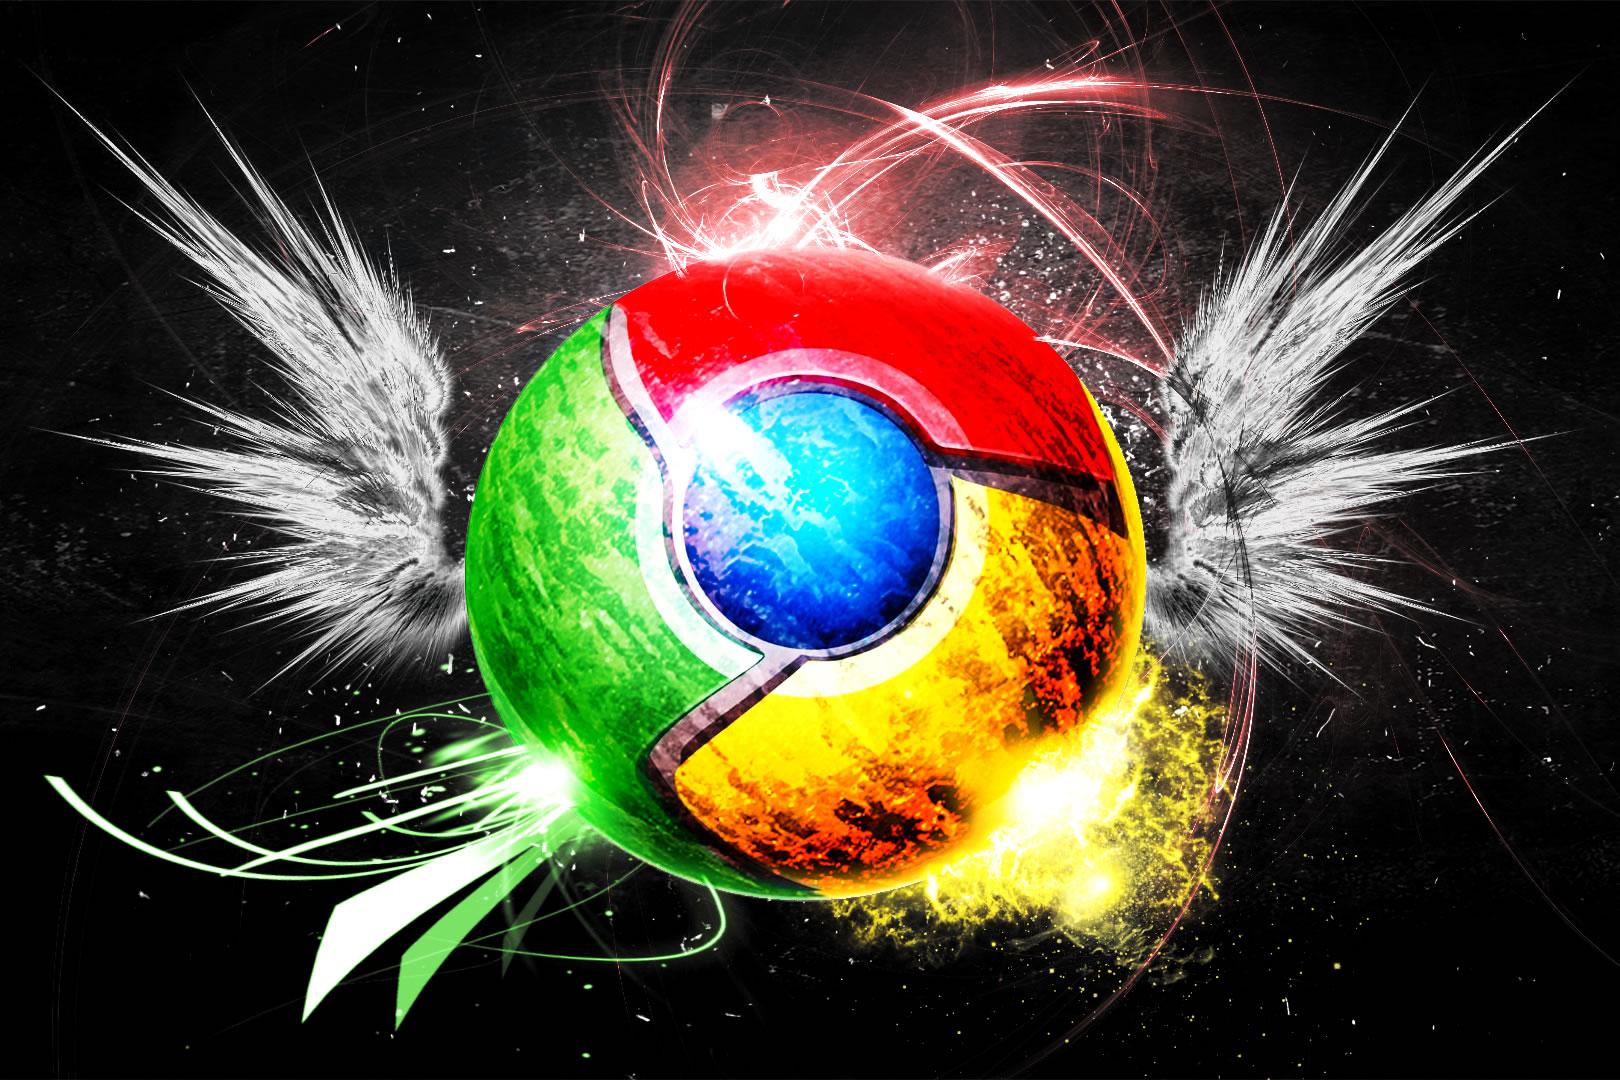 Chrome 39 Brings 64-Bit Support for Mac